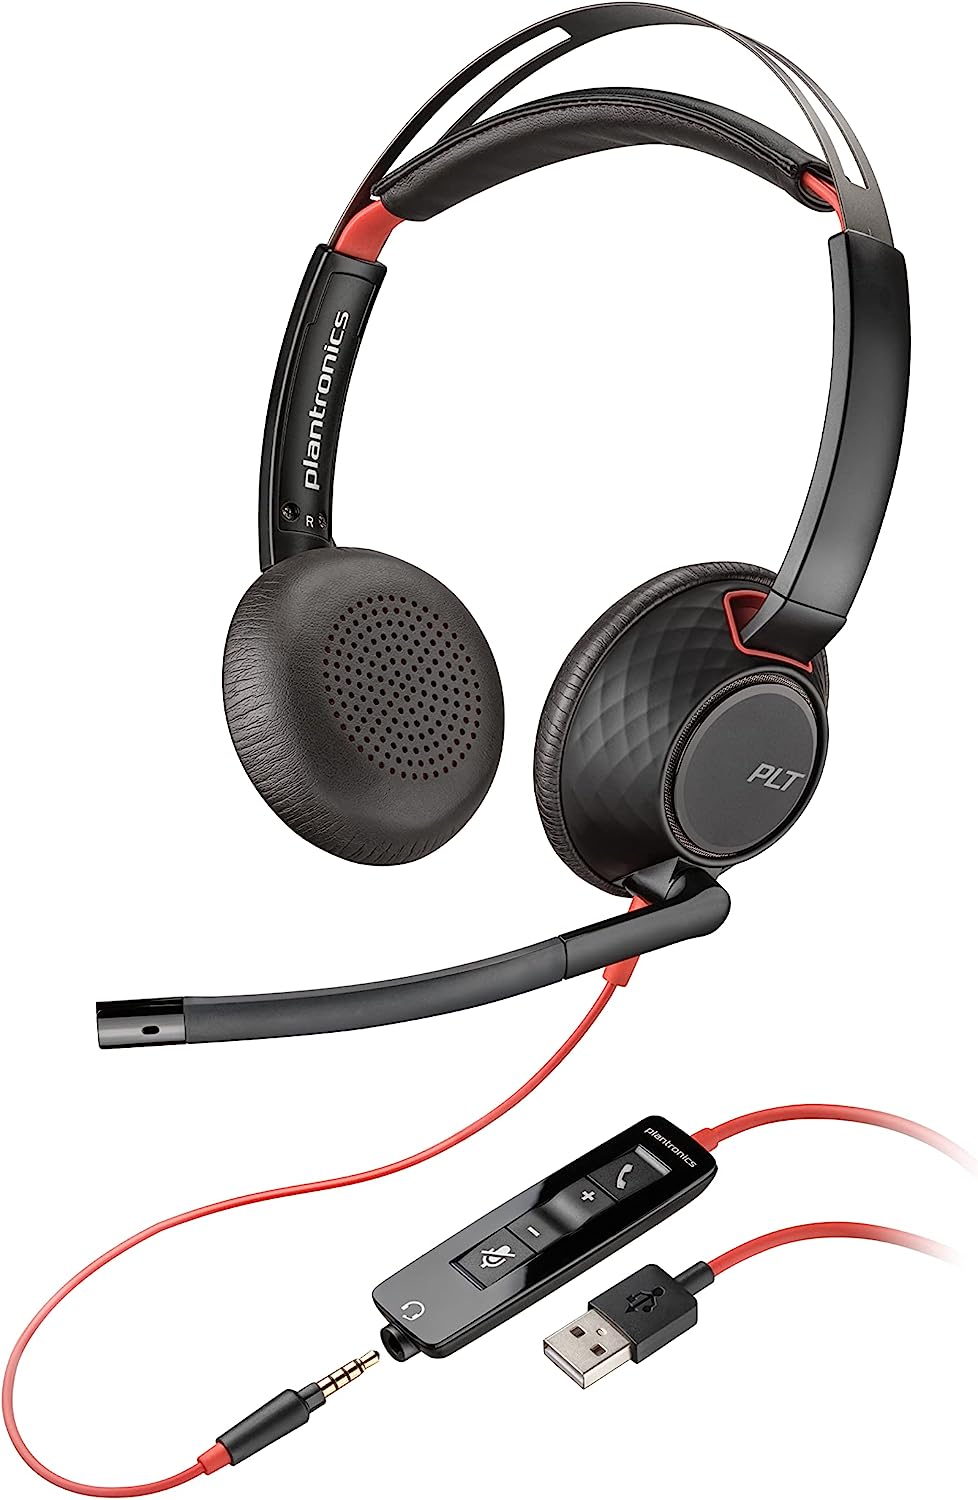 Poly Blackwire 5220 Hi-Fi Stereo Wired Headset